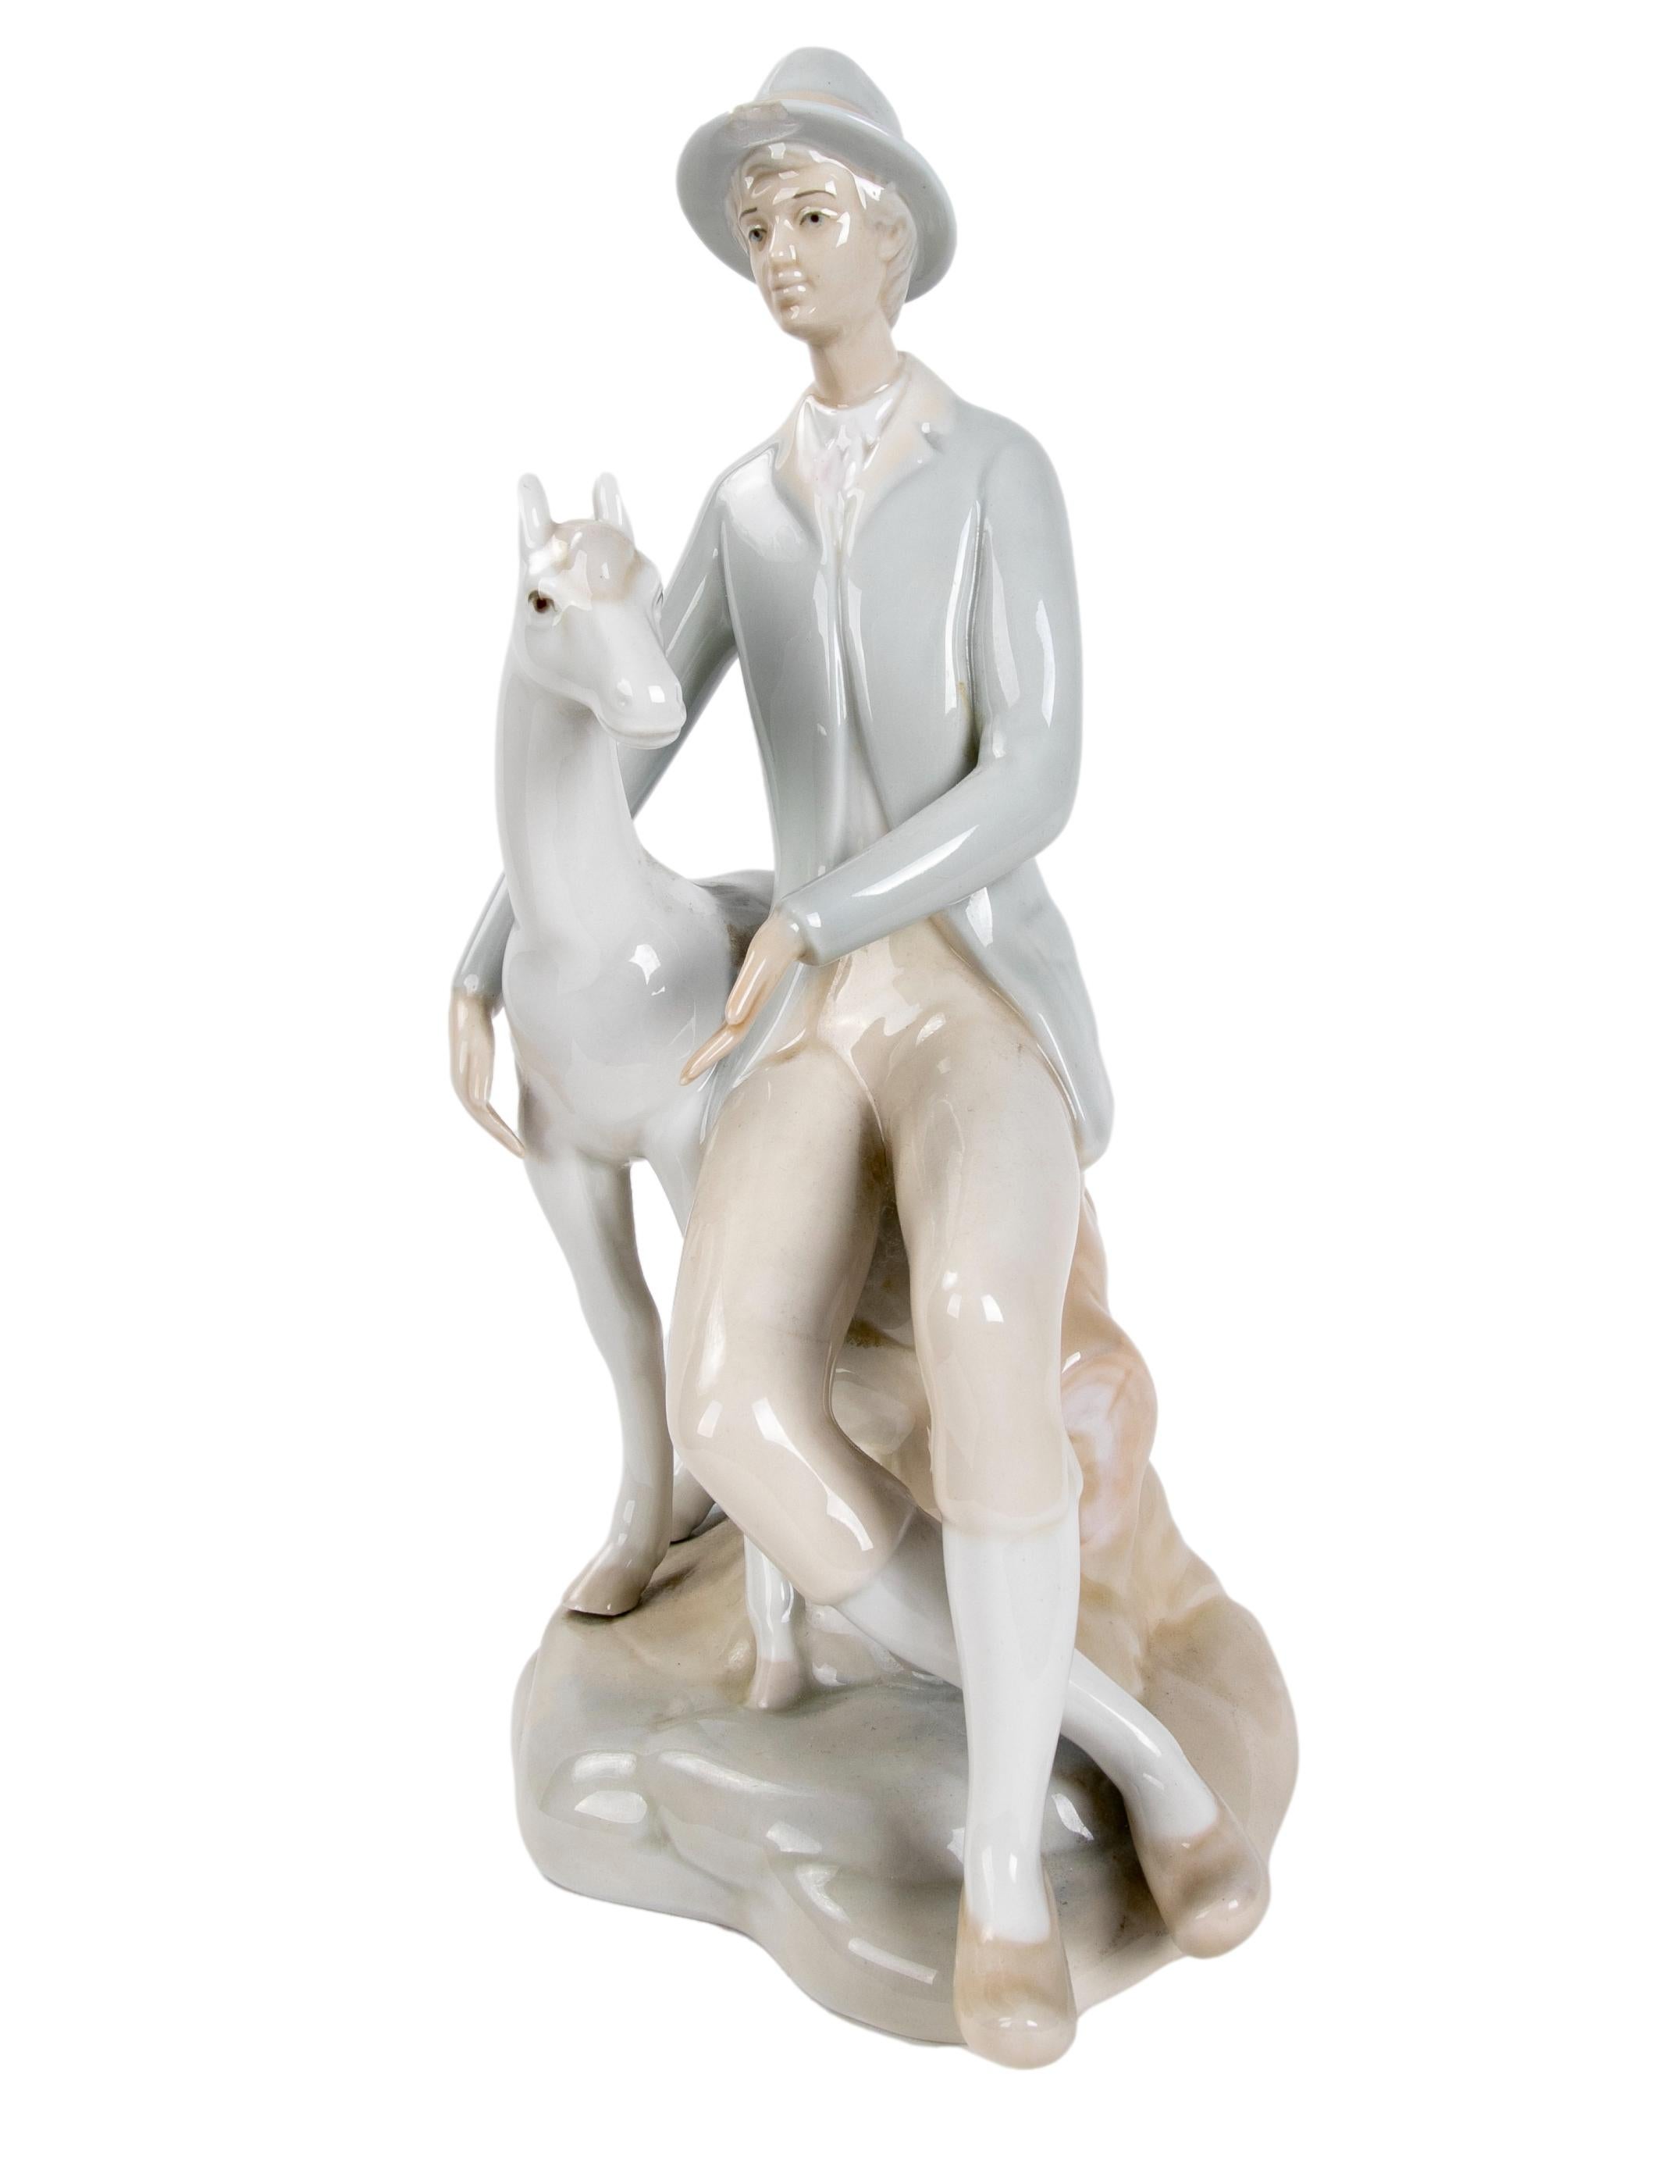 Spanish 1980s Porcelain Figure by LLadro For Sale